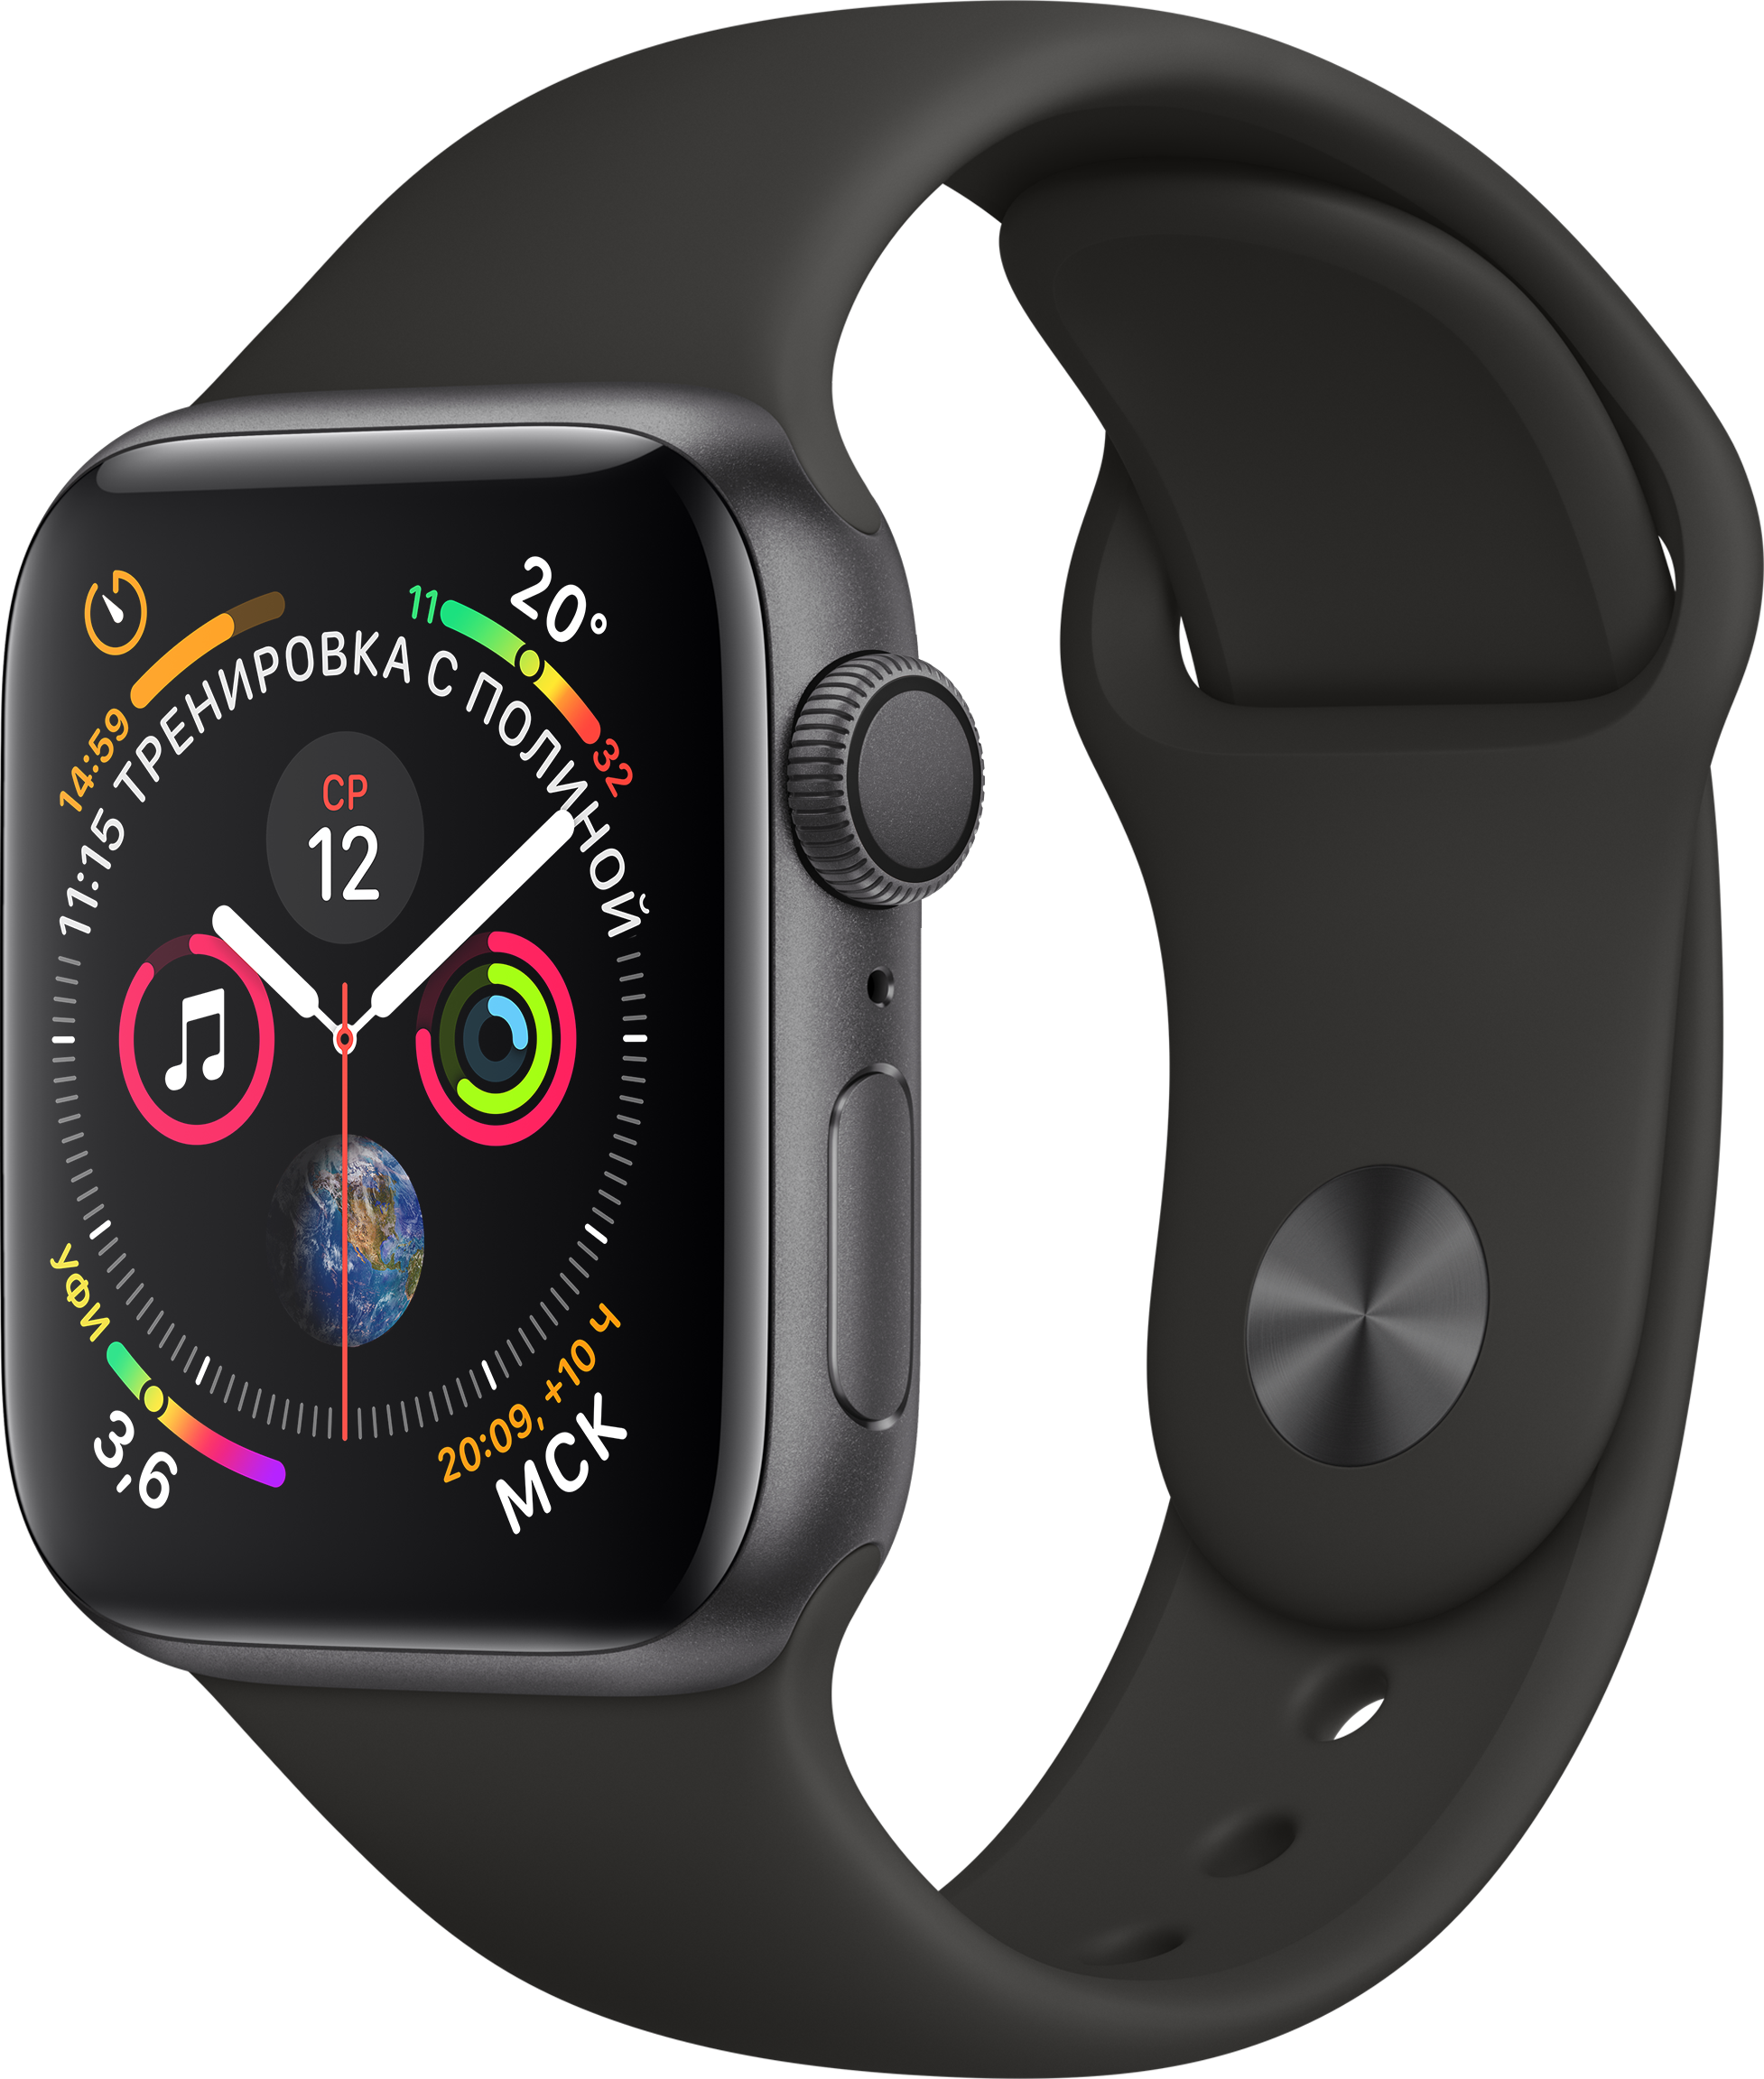 Watch Series 4 GPS (40mm, Space Gray Aluminum Case with Black Sport Band)